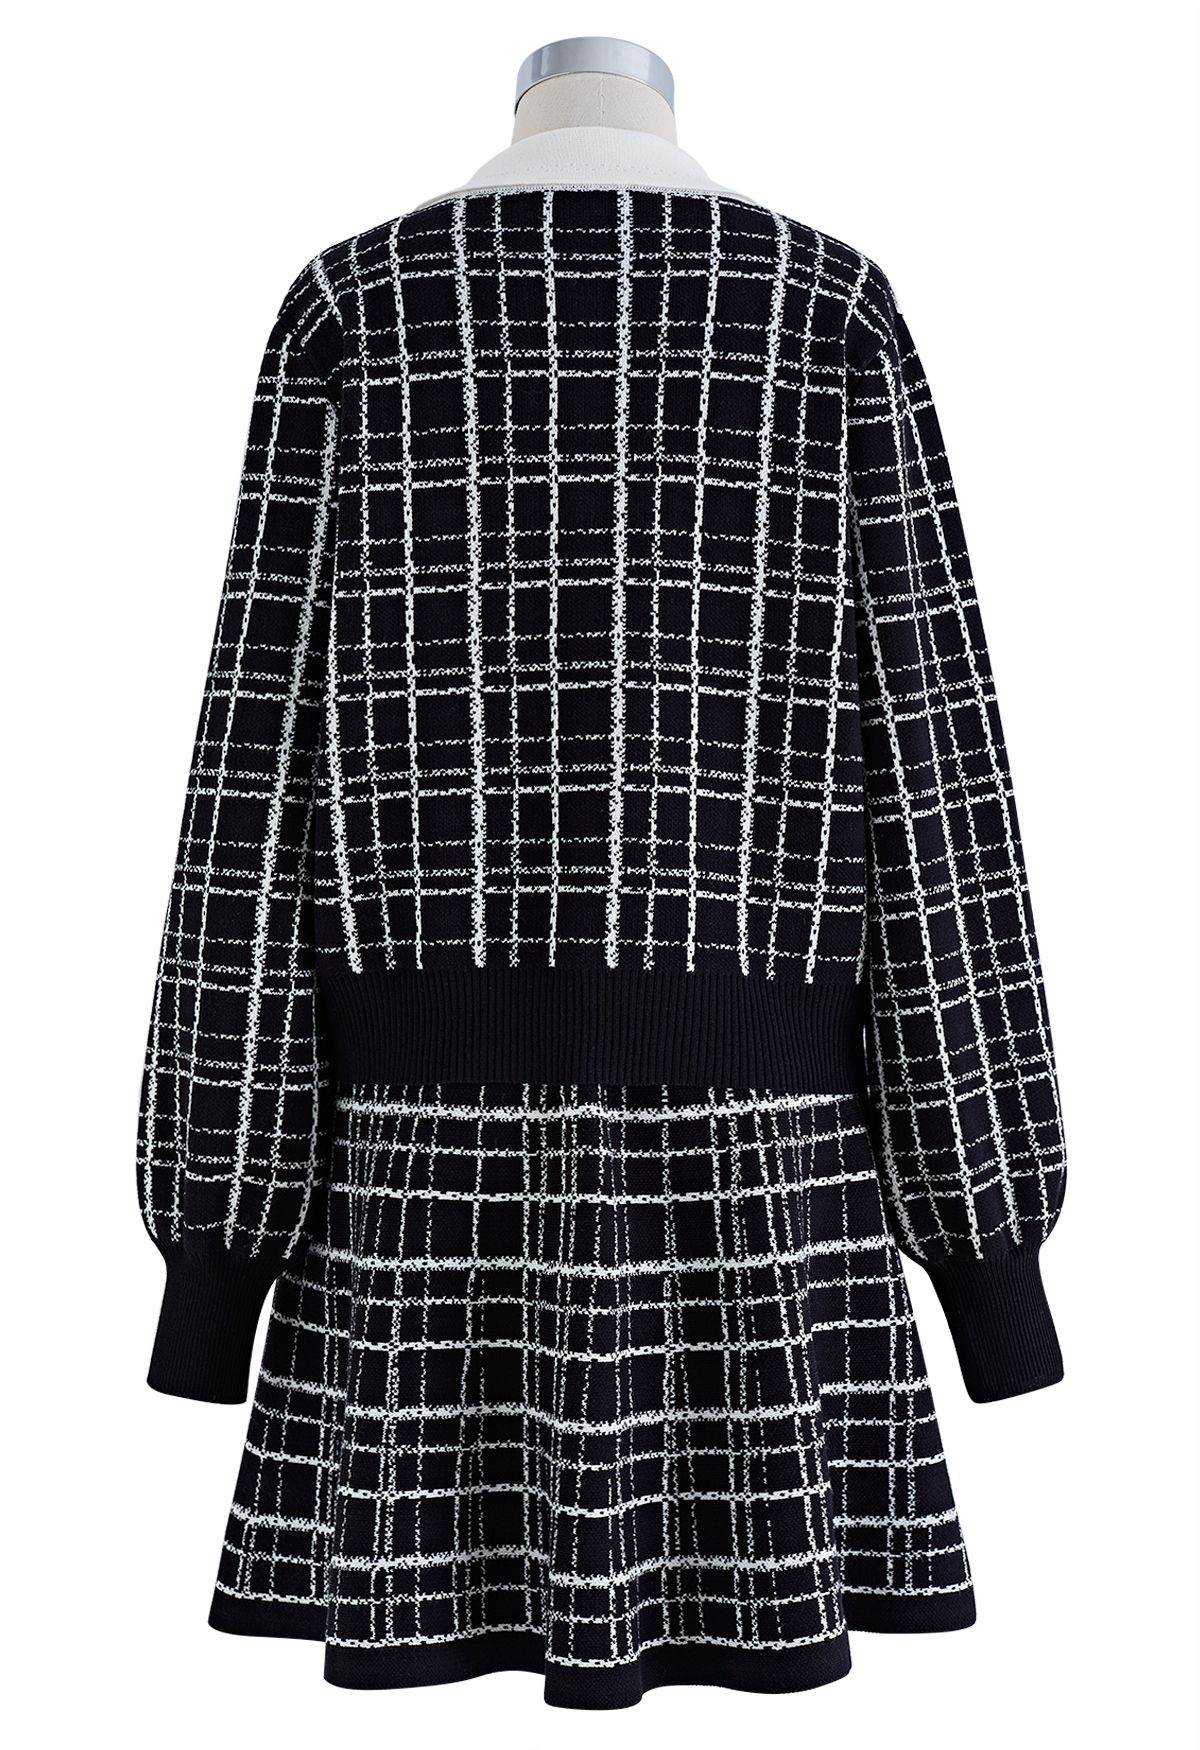 Grid Contrast Collar Knit Top and Skater Skirt Set